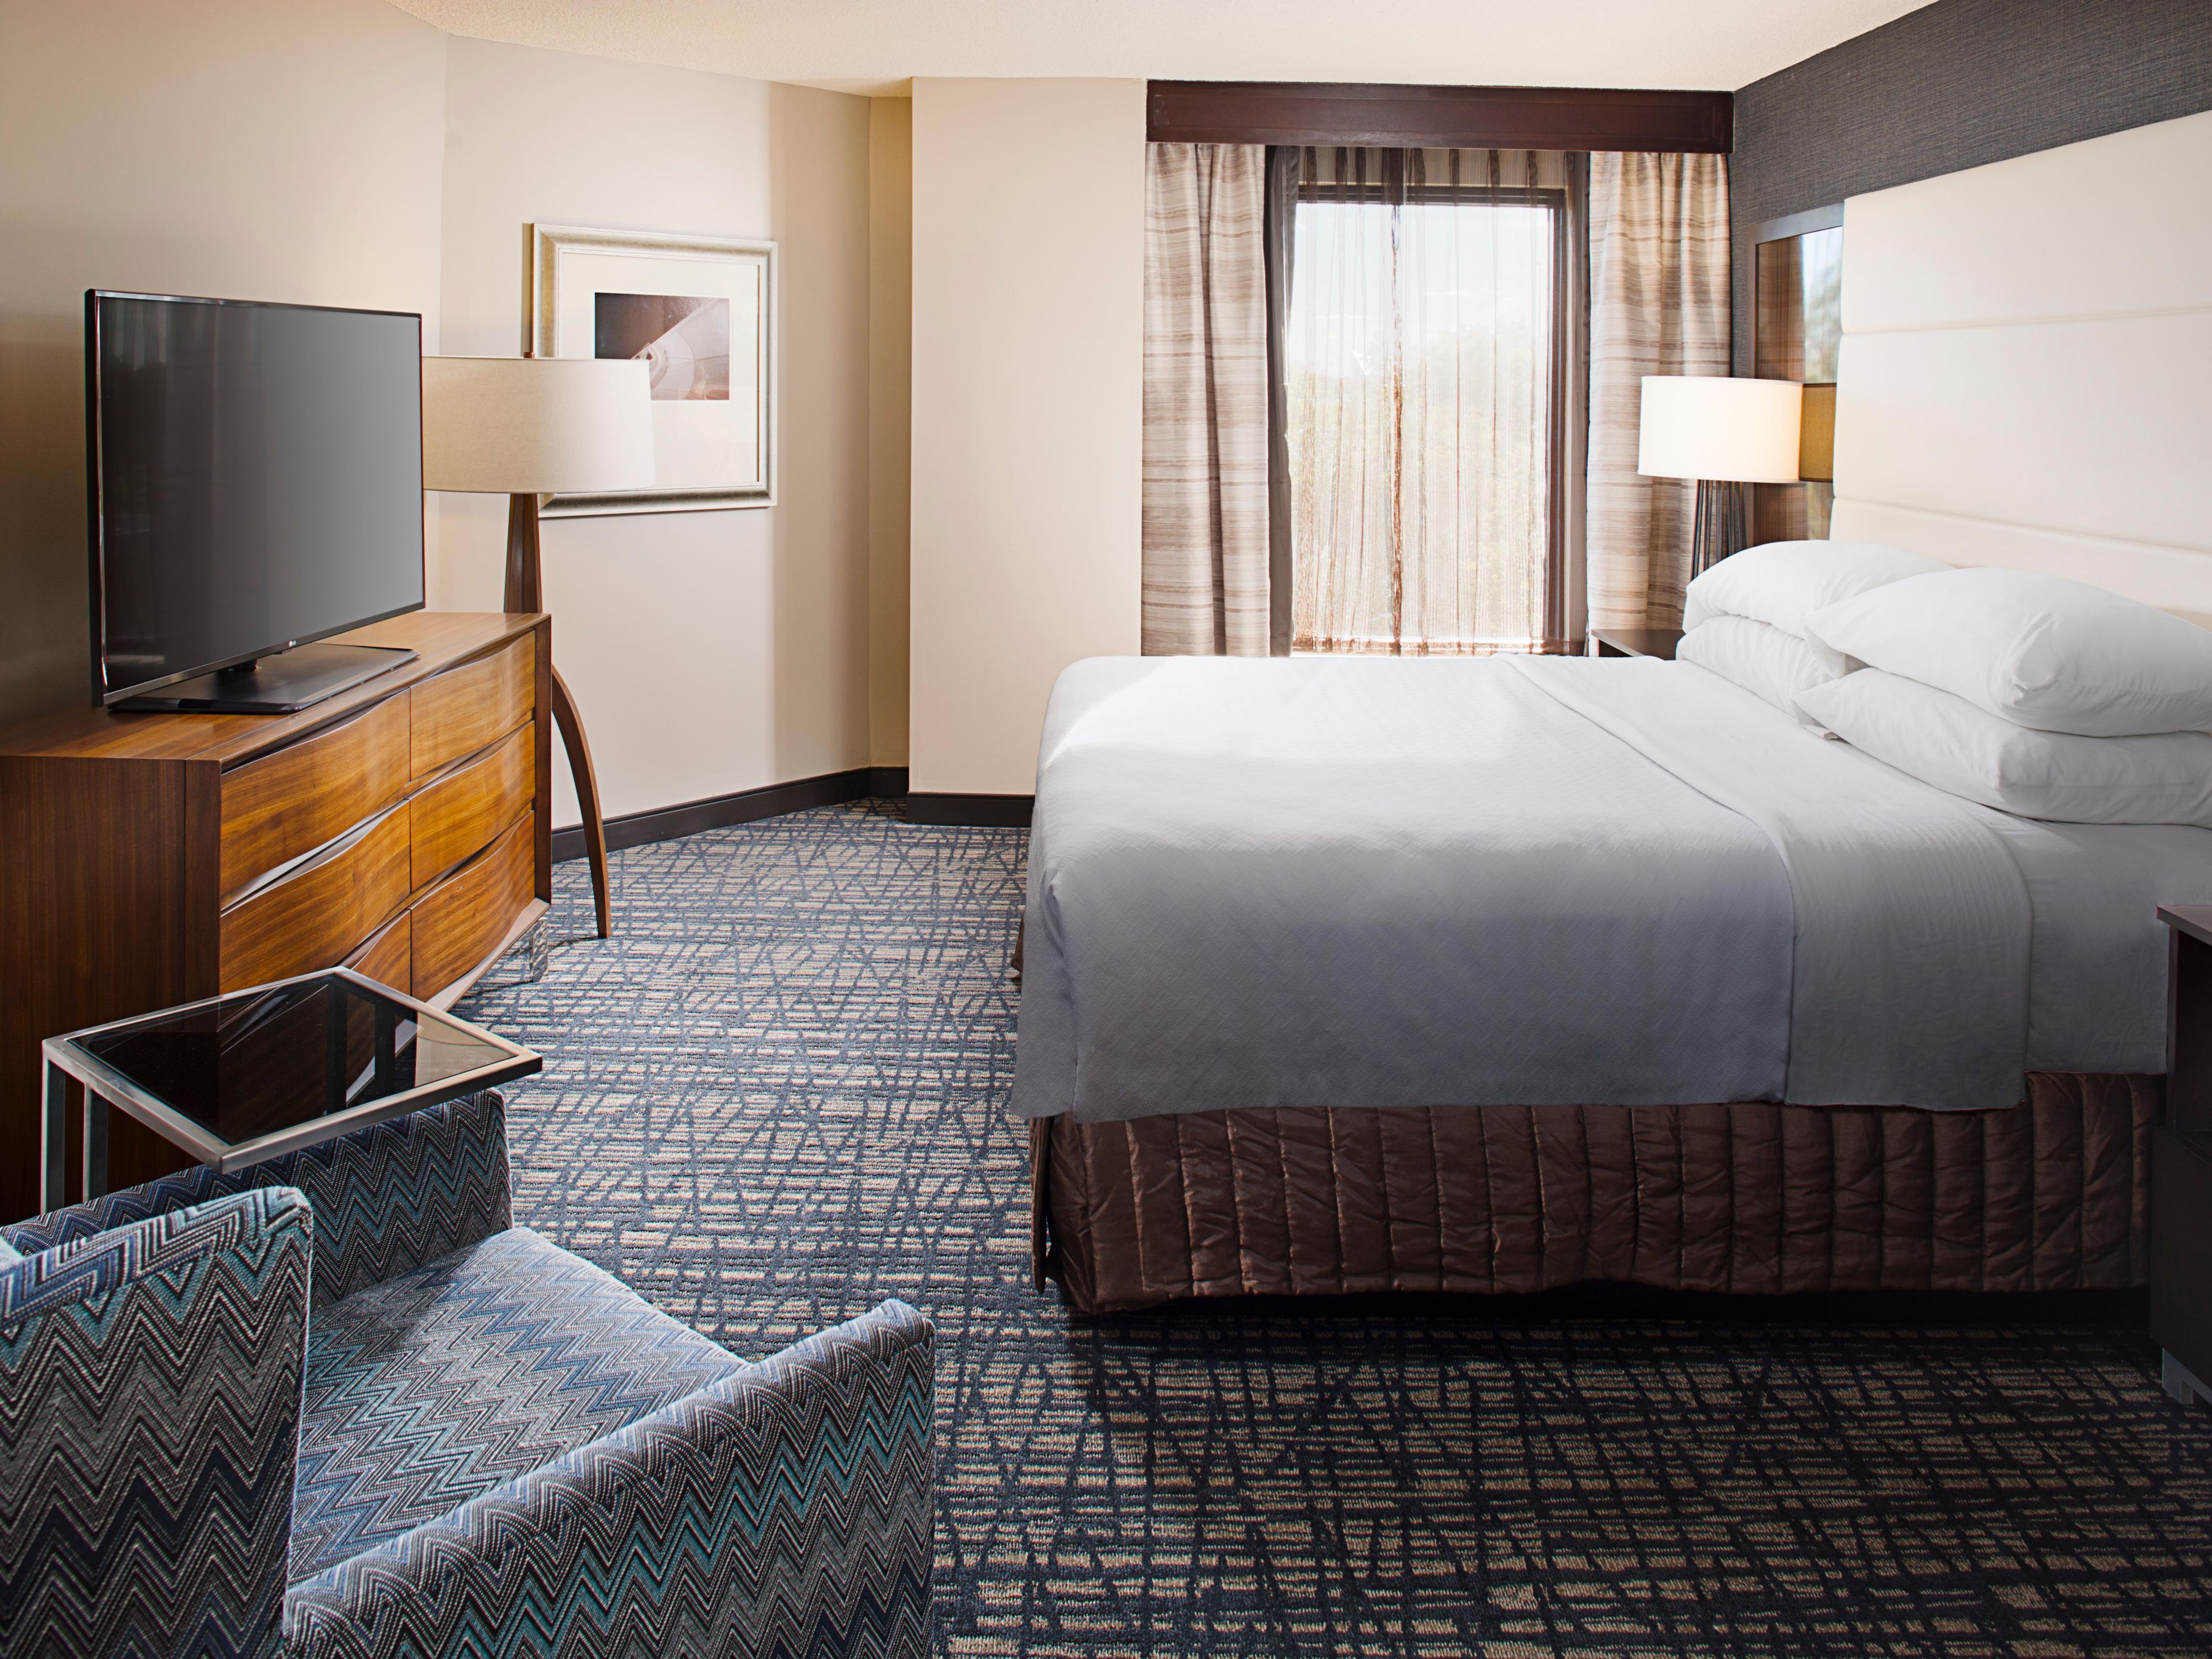 Enjoy our PURE® Wellness guestrooms, that undergo a patented 7-step purification process to remove up to 99.9% of pollutants and allergens, so you can breathe easy and relax comfortably.